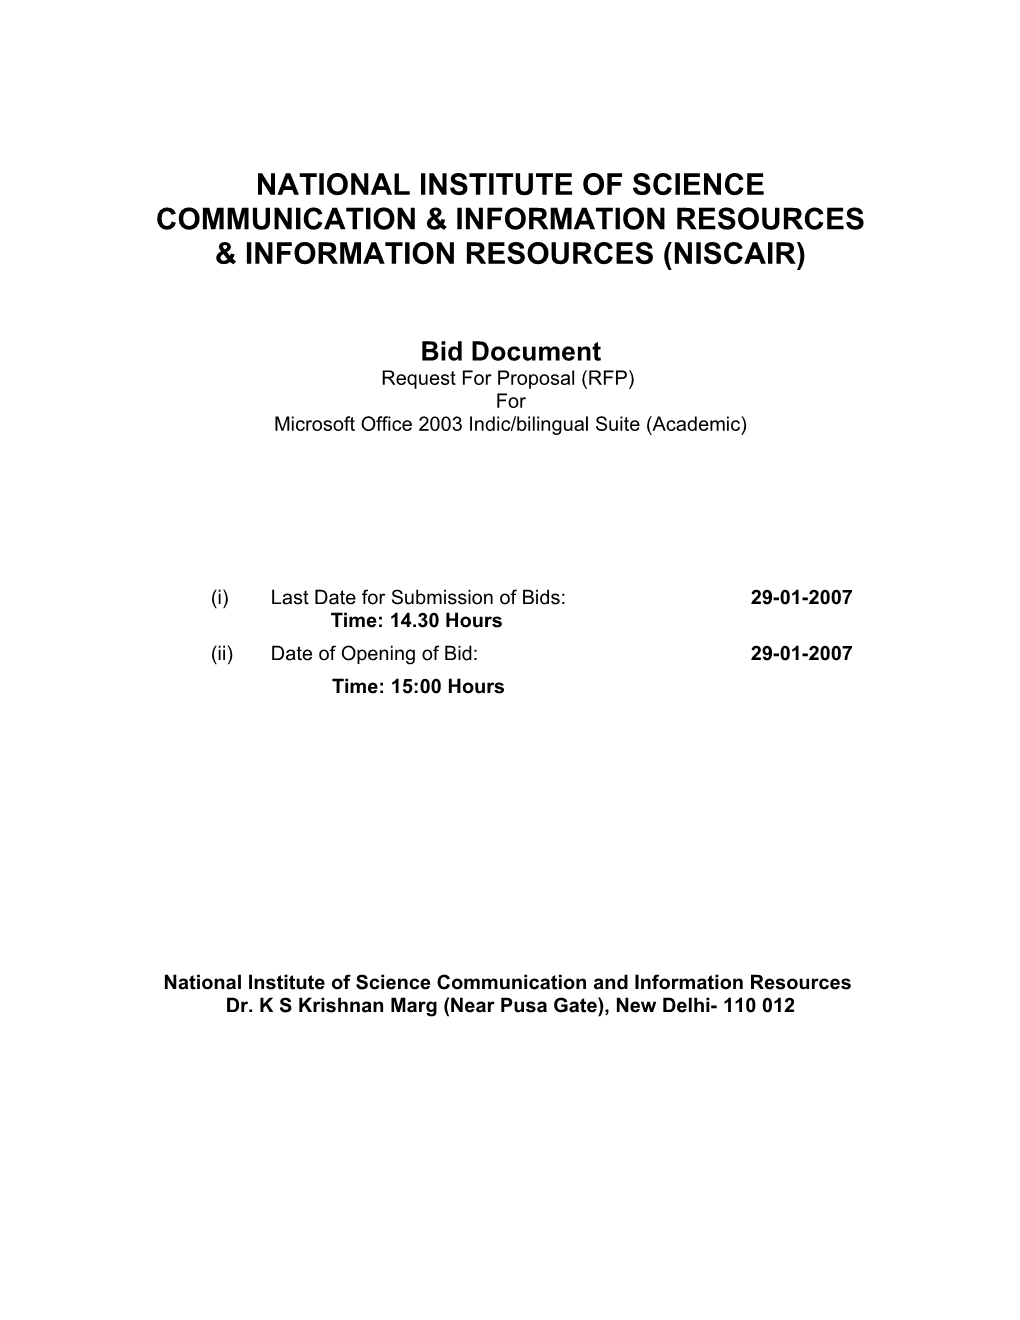 National Institute of Science Communication & Information Resources & Information Resources